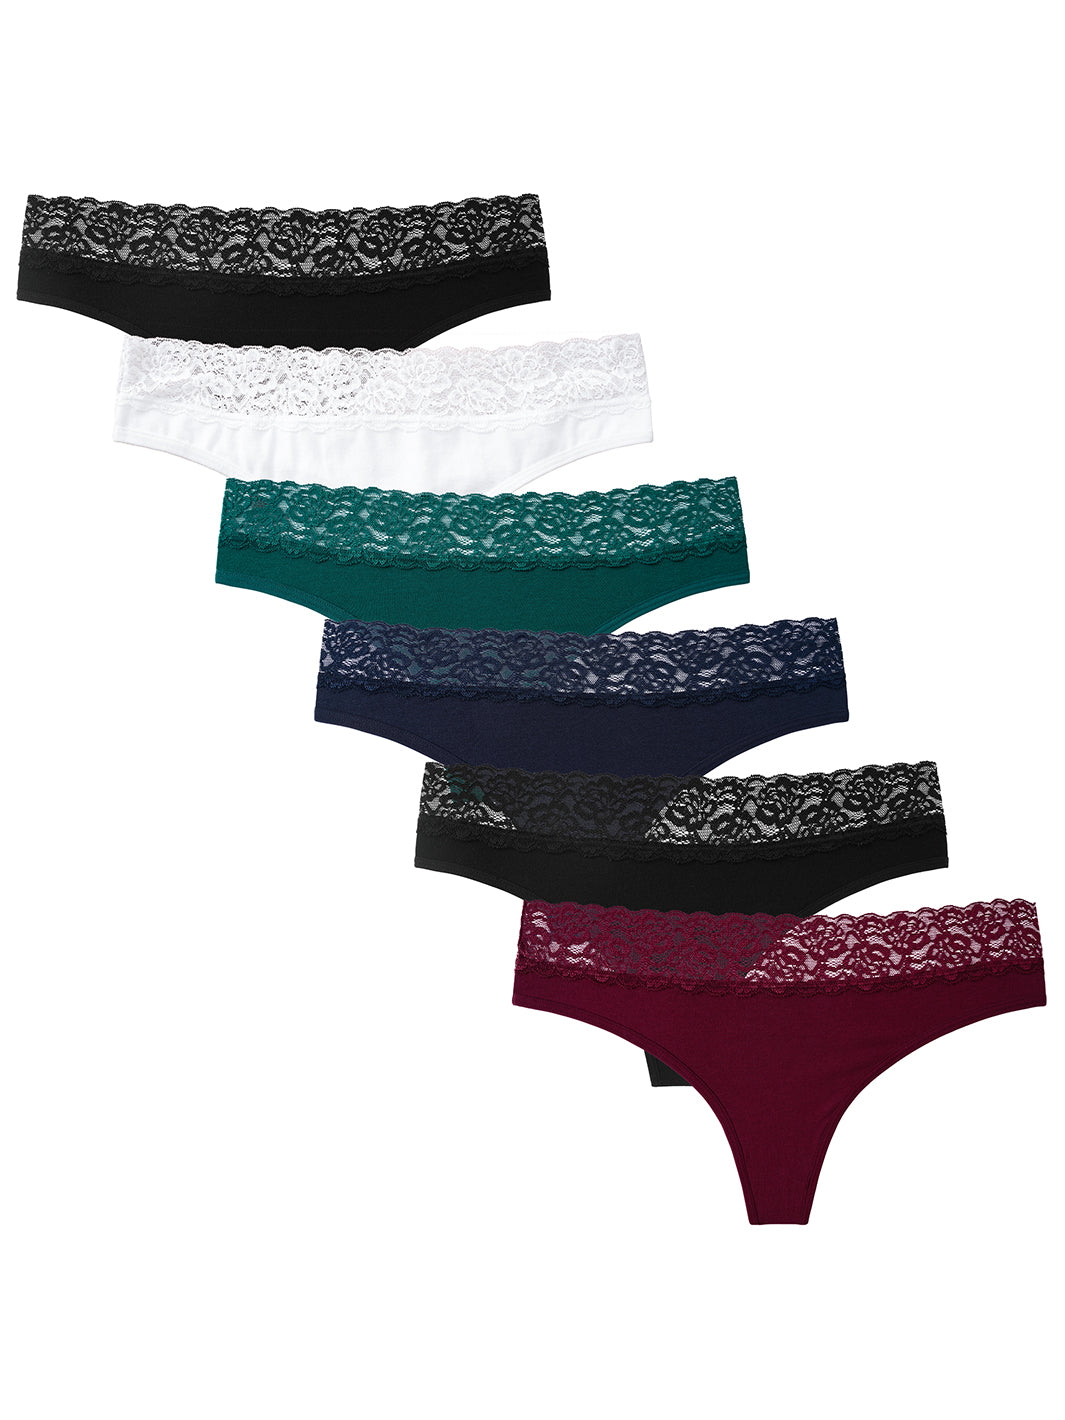 INNERSY Womens Lace Underwear Cotton Hipster Panties Regular